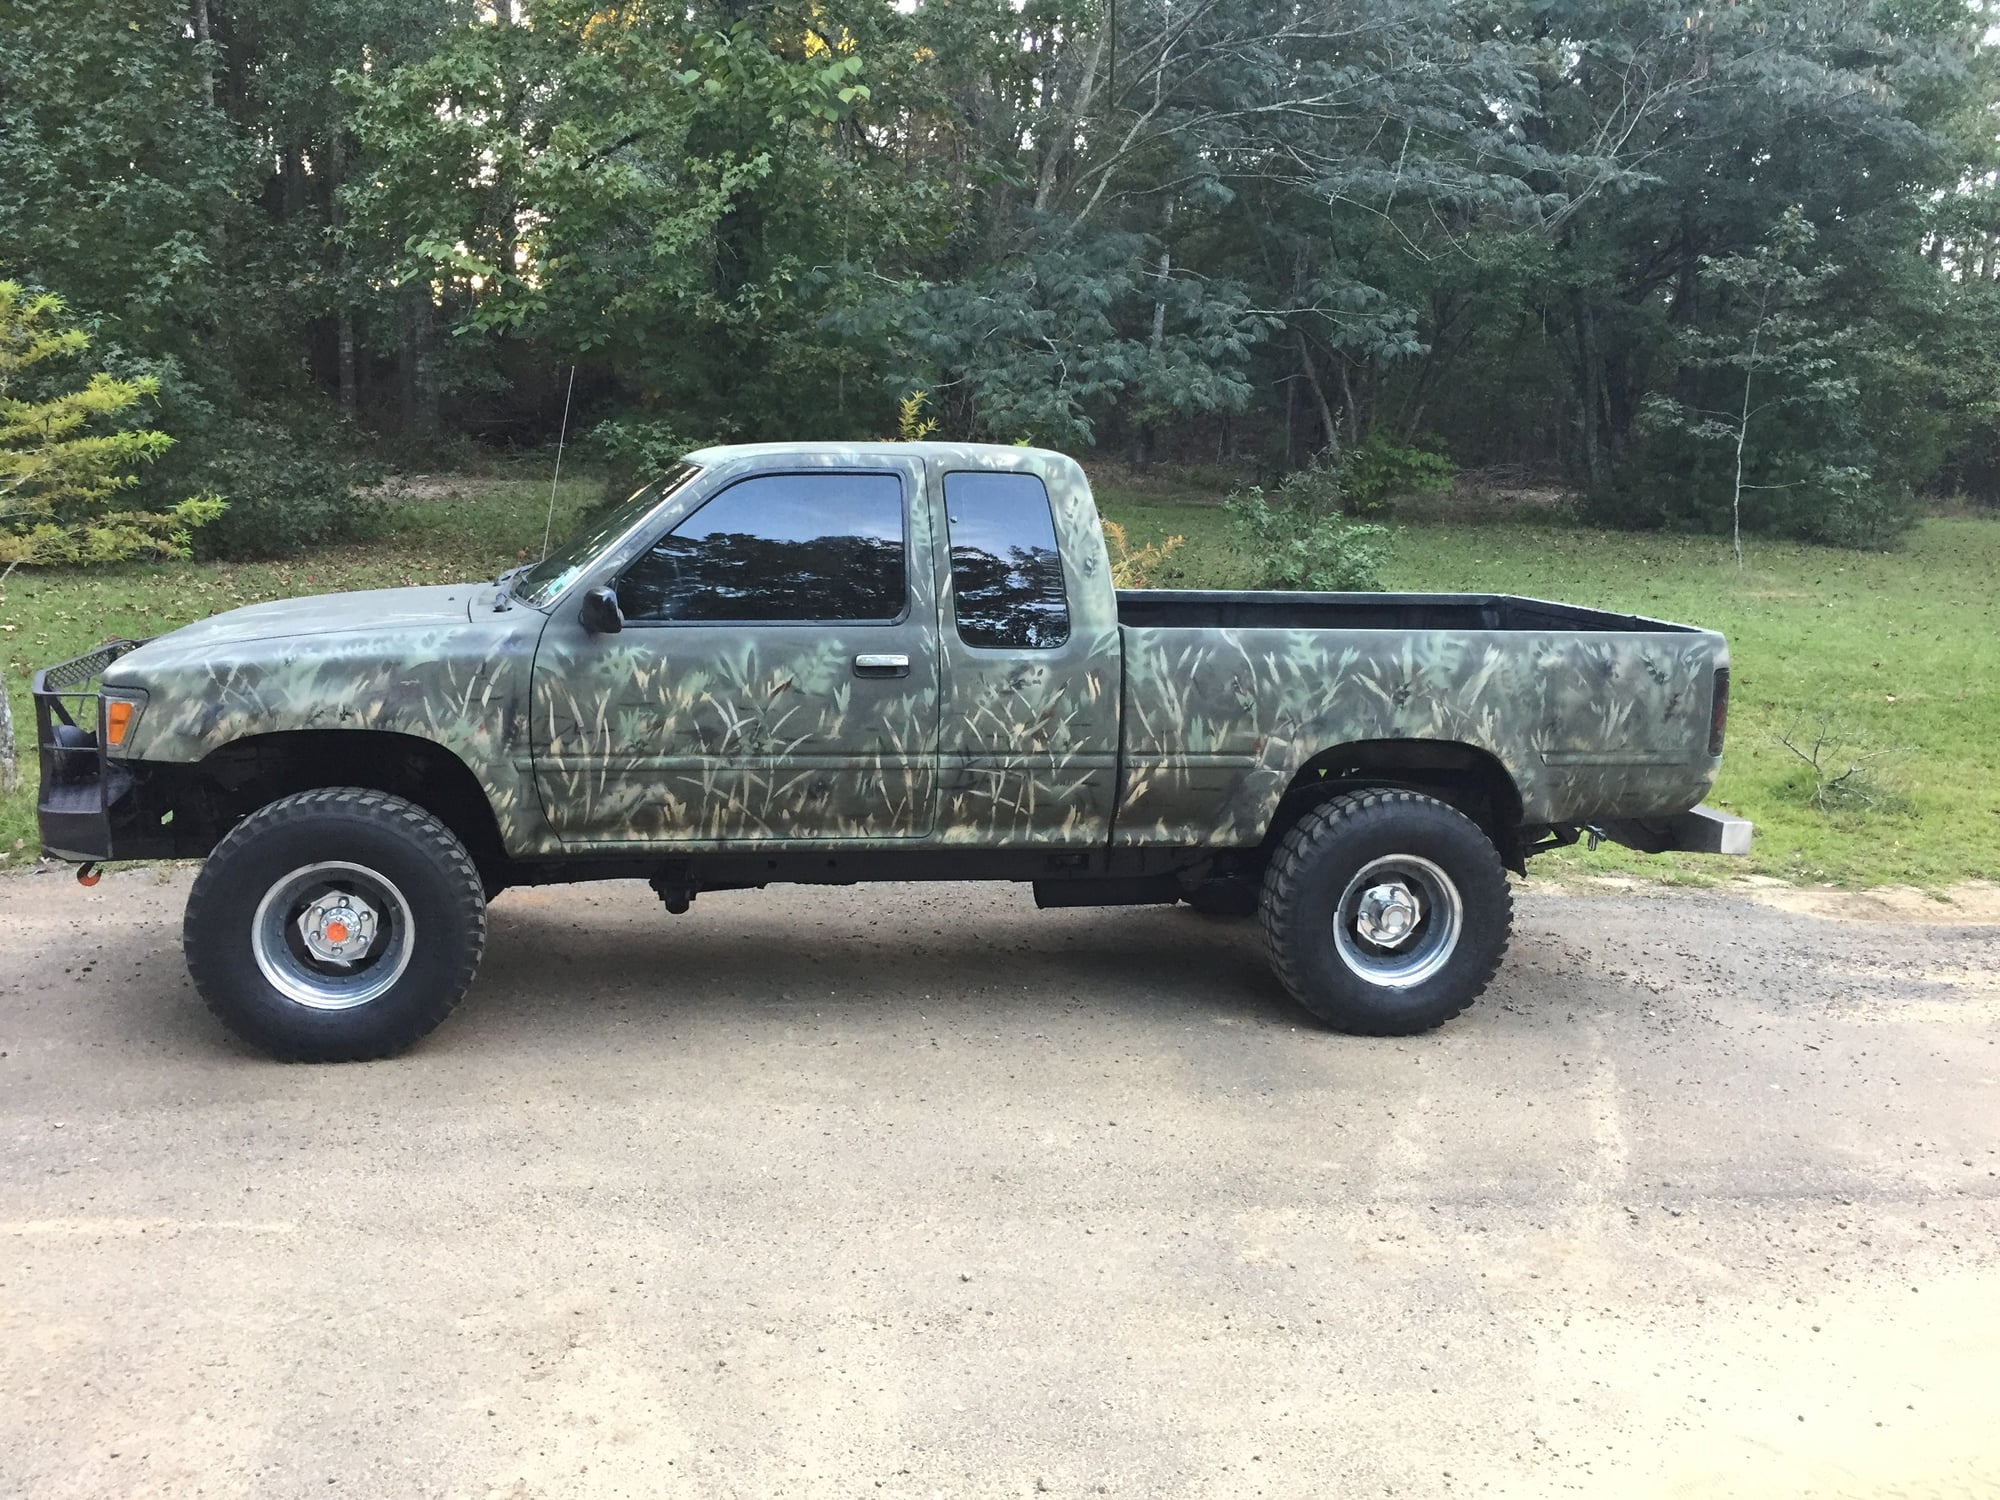 93 Toyota pickup - lost all lights??? - YotaTech Forums